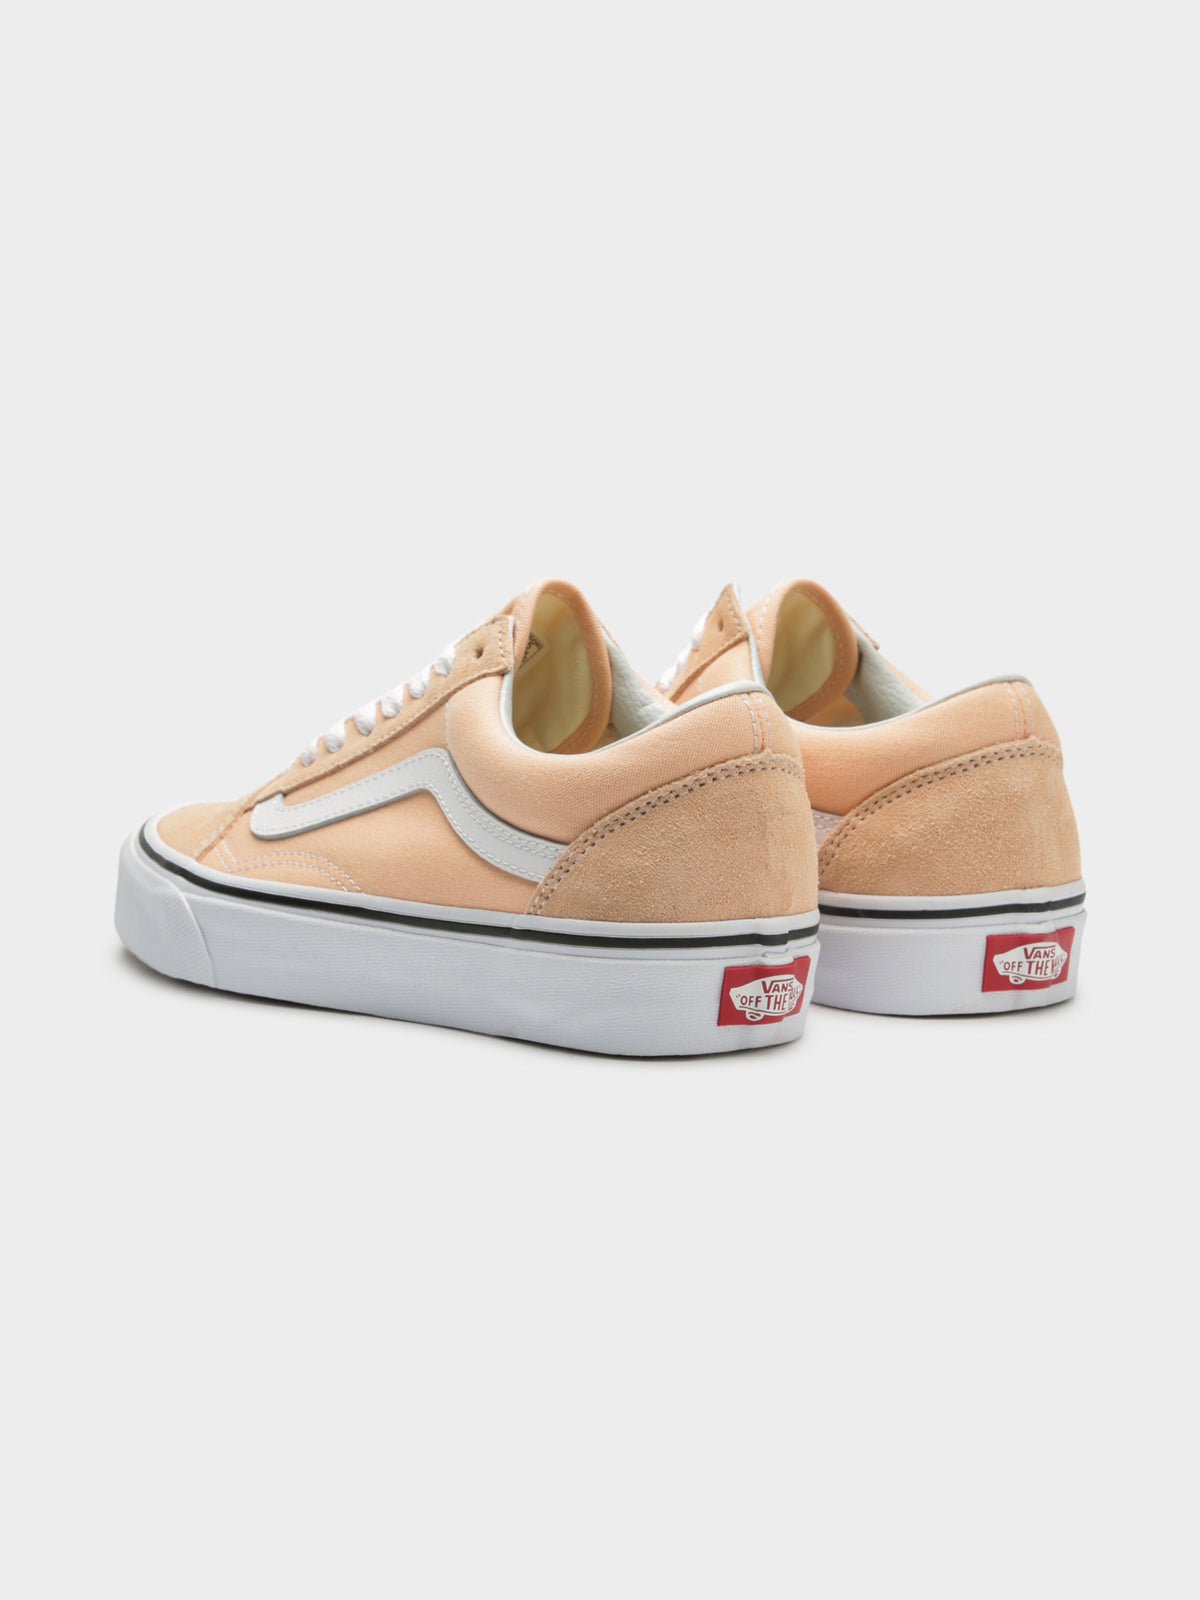 Unisex Old Skool Sneakers in Bleached Apricot and True White